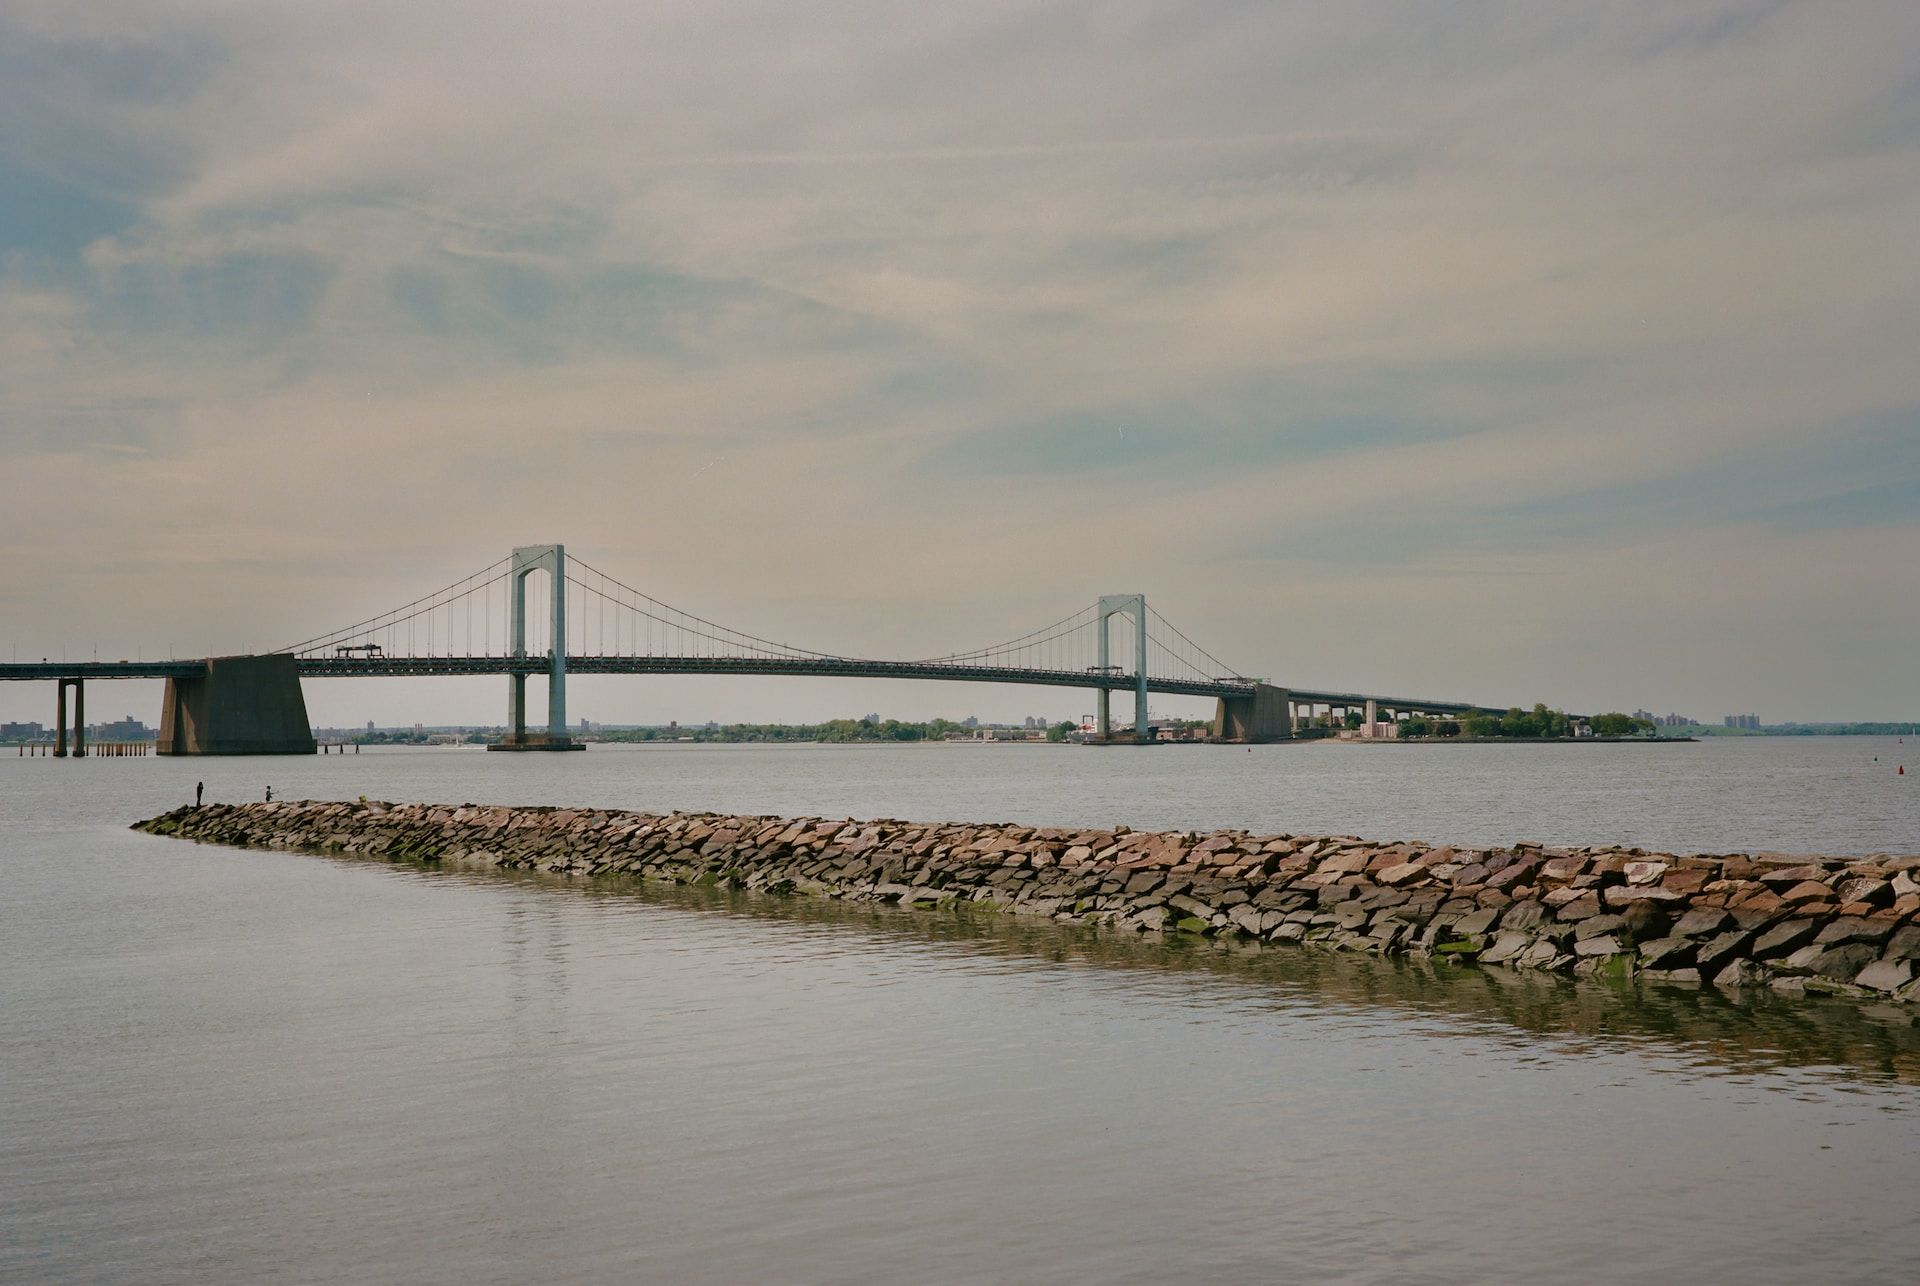 A shot of the bridge in Bayside, NYC